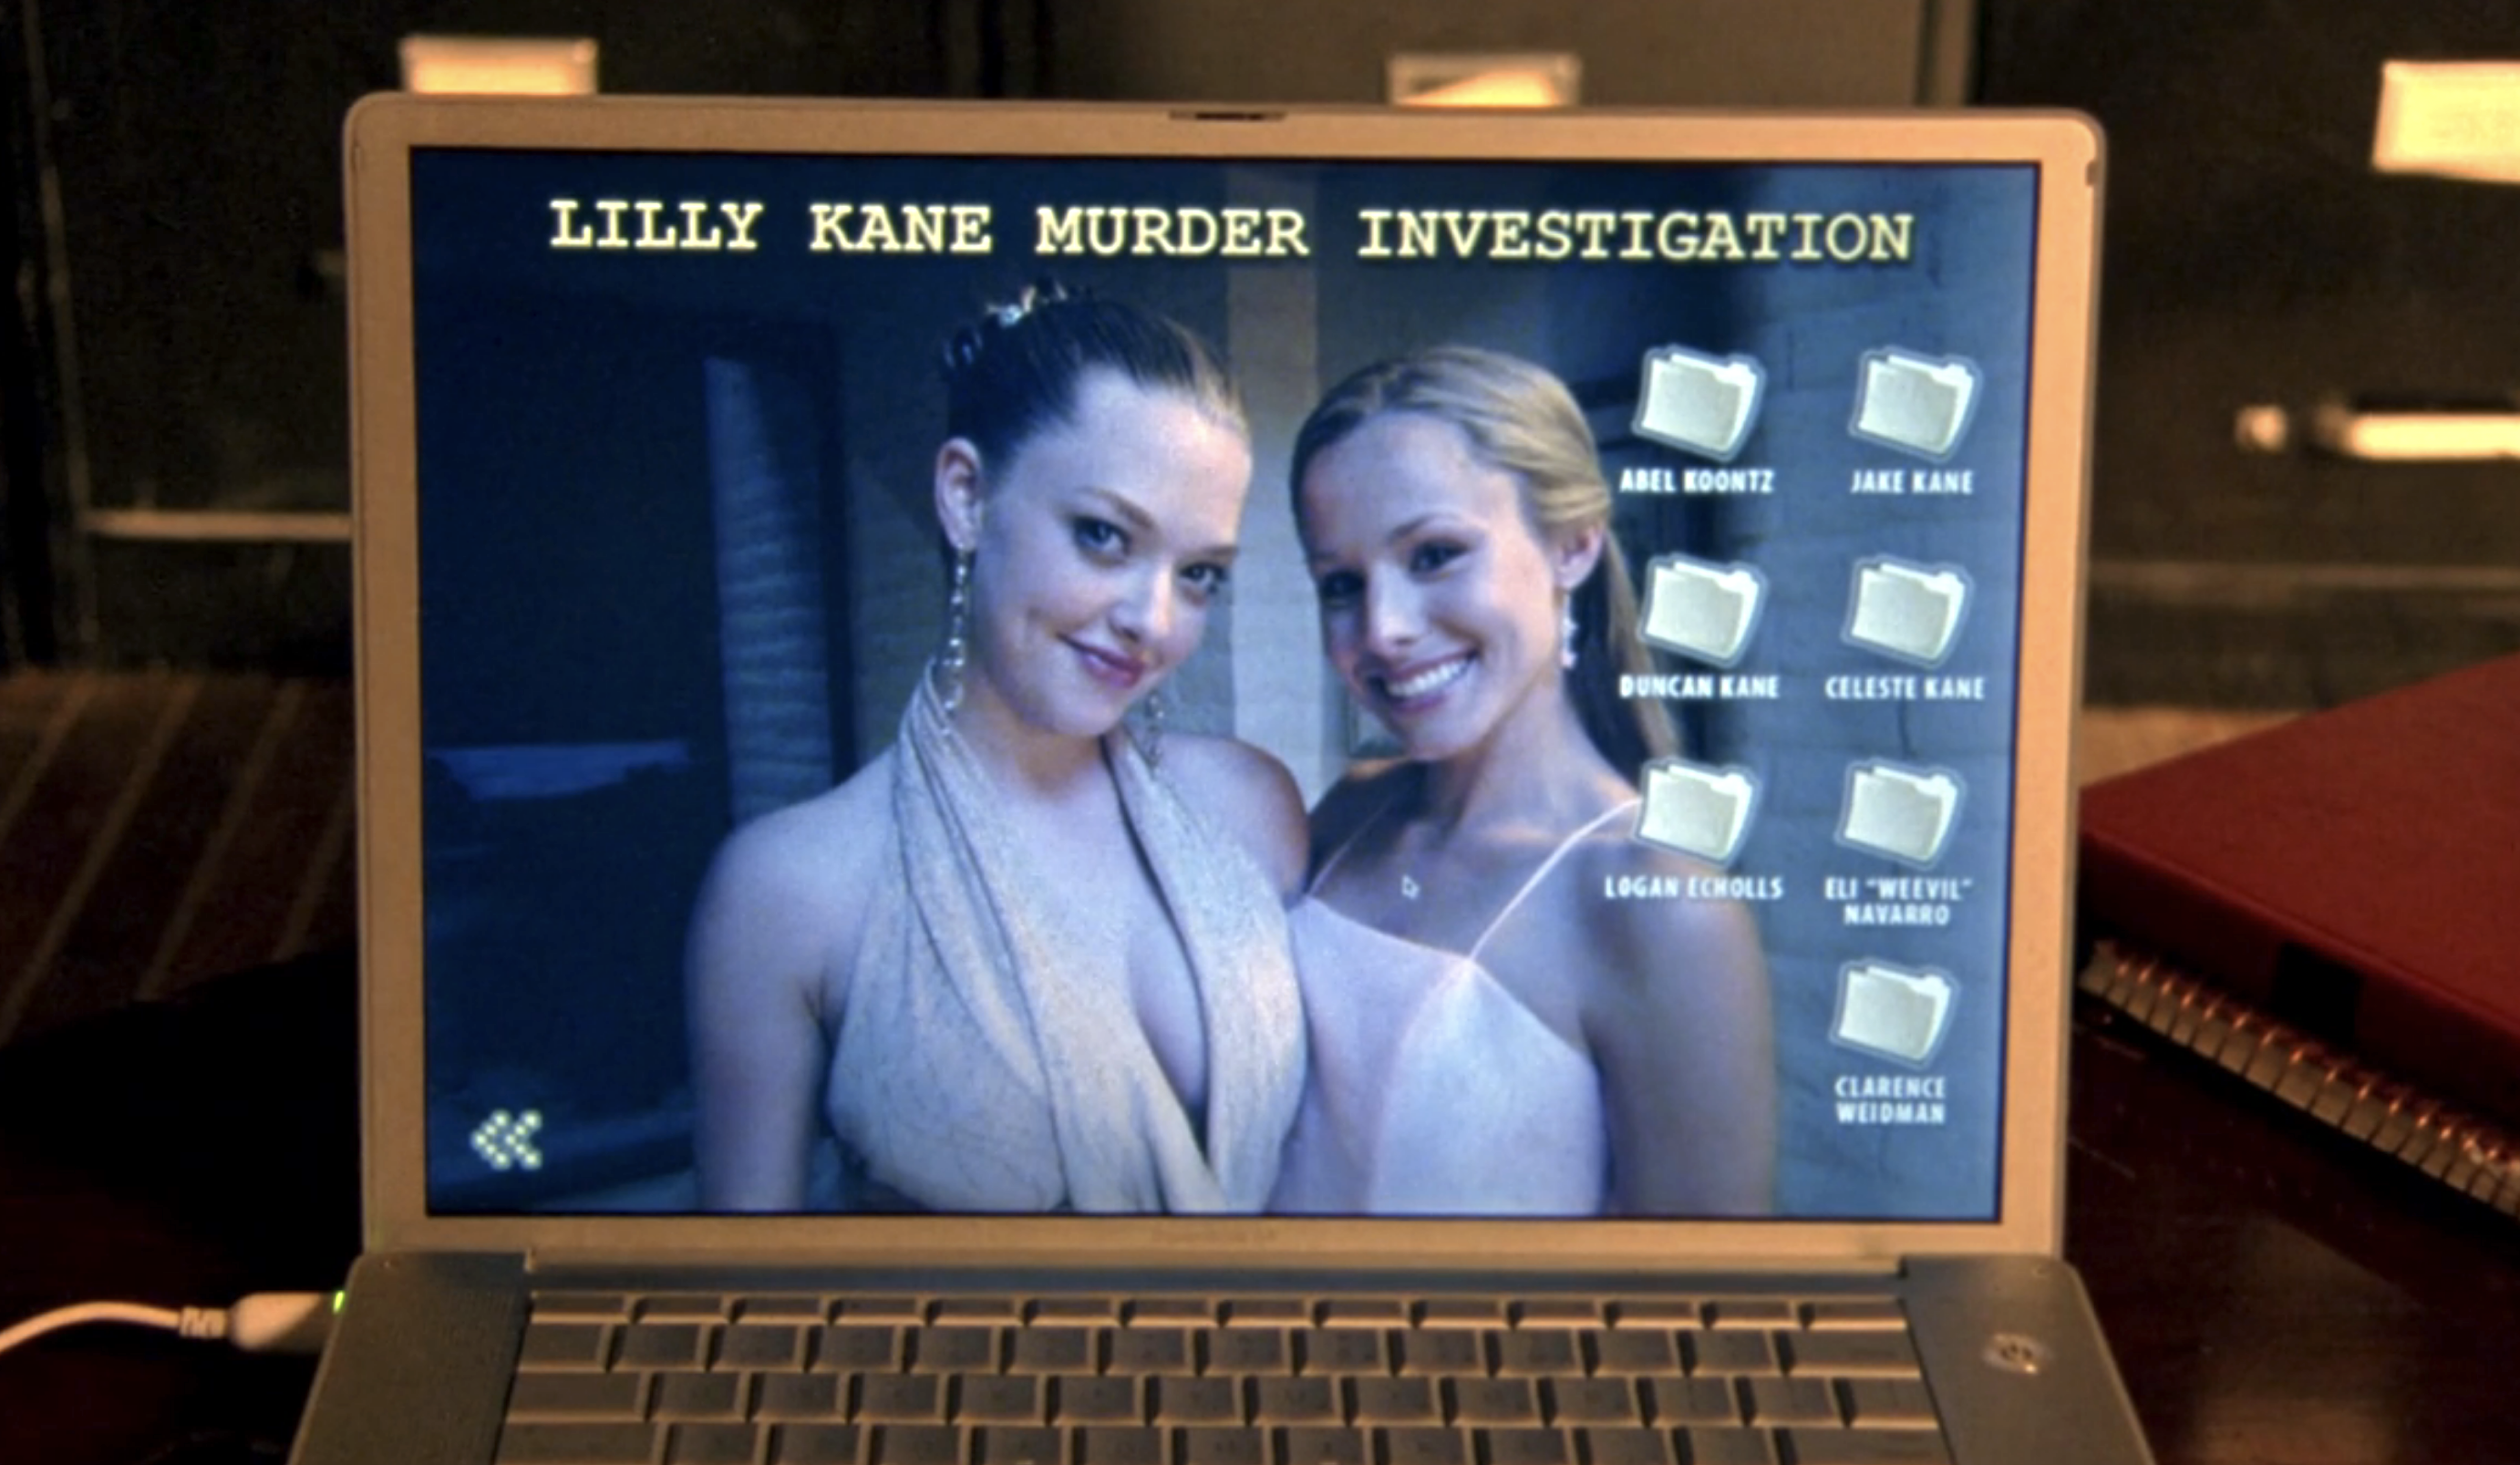 Screenshot from S1E17 of Veronica Mars. The photo is a Mac laptop whose wallpaper says "Lilly Kane Murder Investigation" with a photo of Lilly and Veronica dressed up for a dance standing and smiling together. On the desktop there are folders labeled with all Veronica's suspects in Lilly's murder.